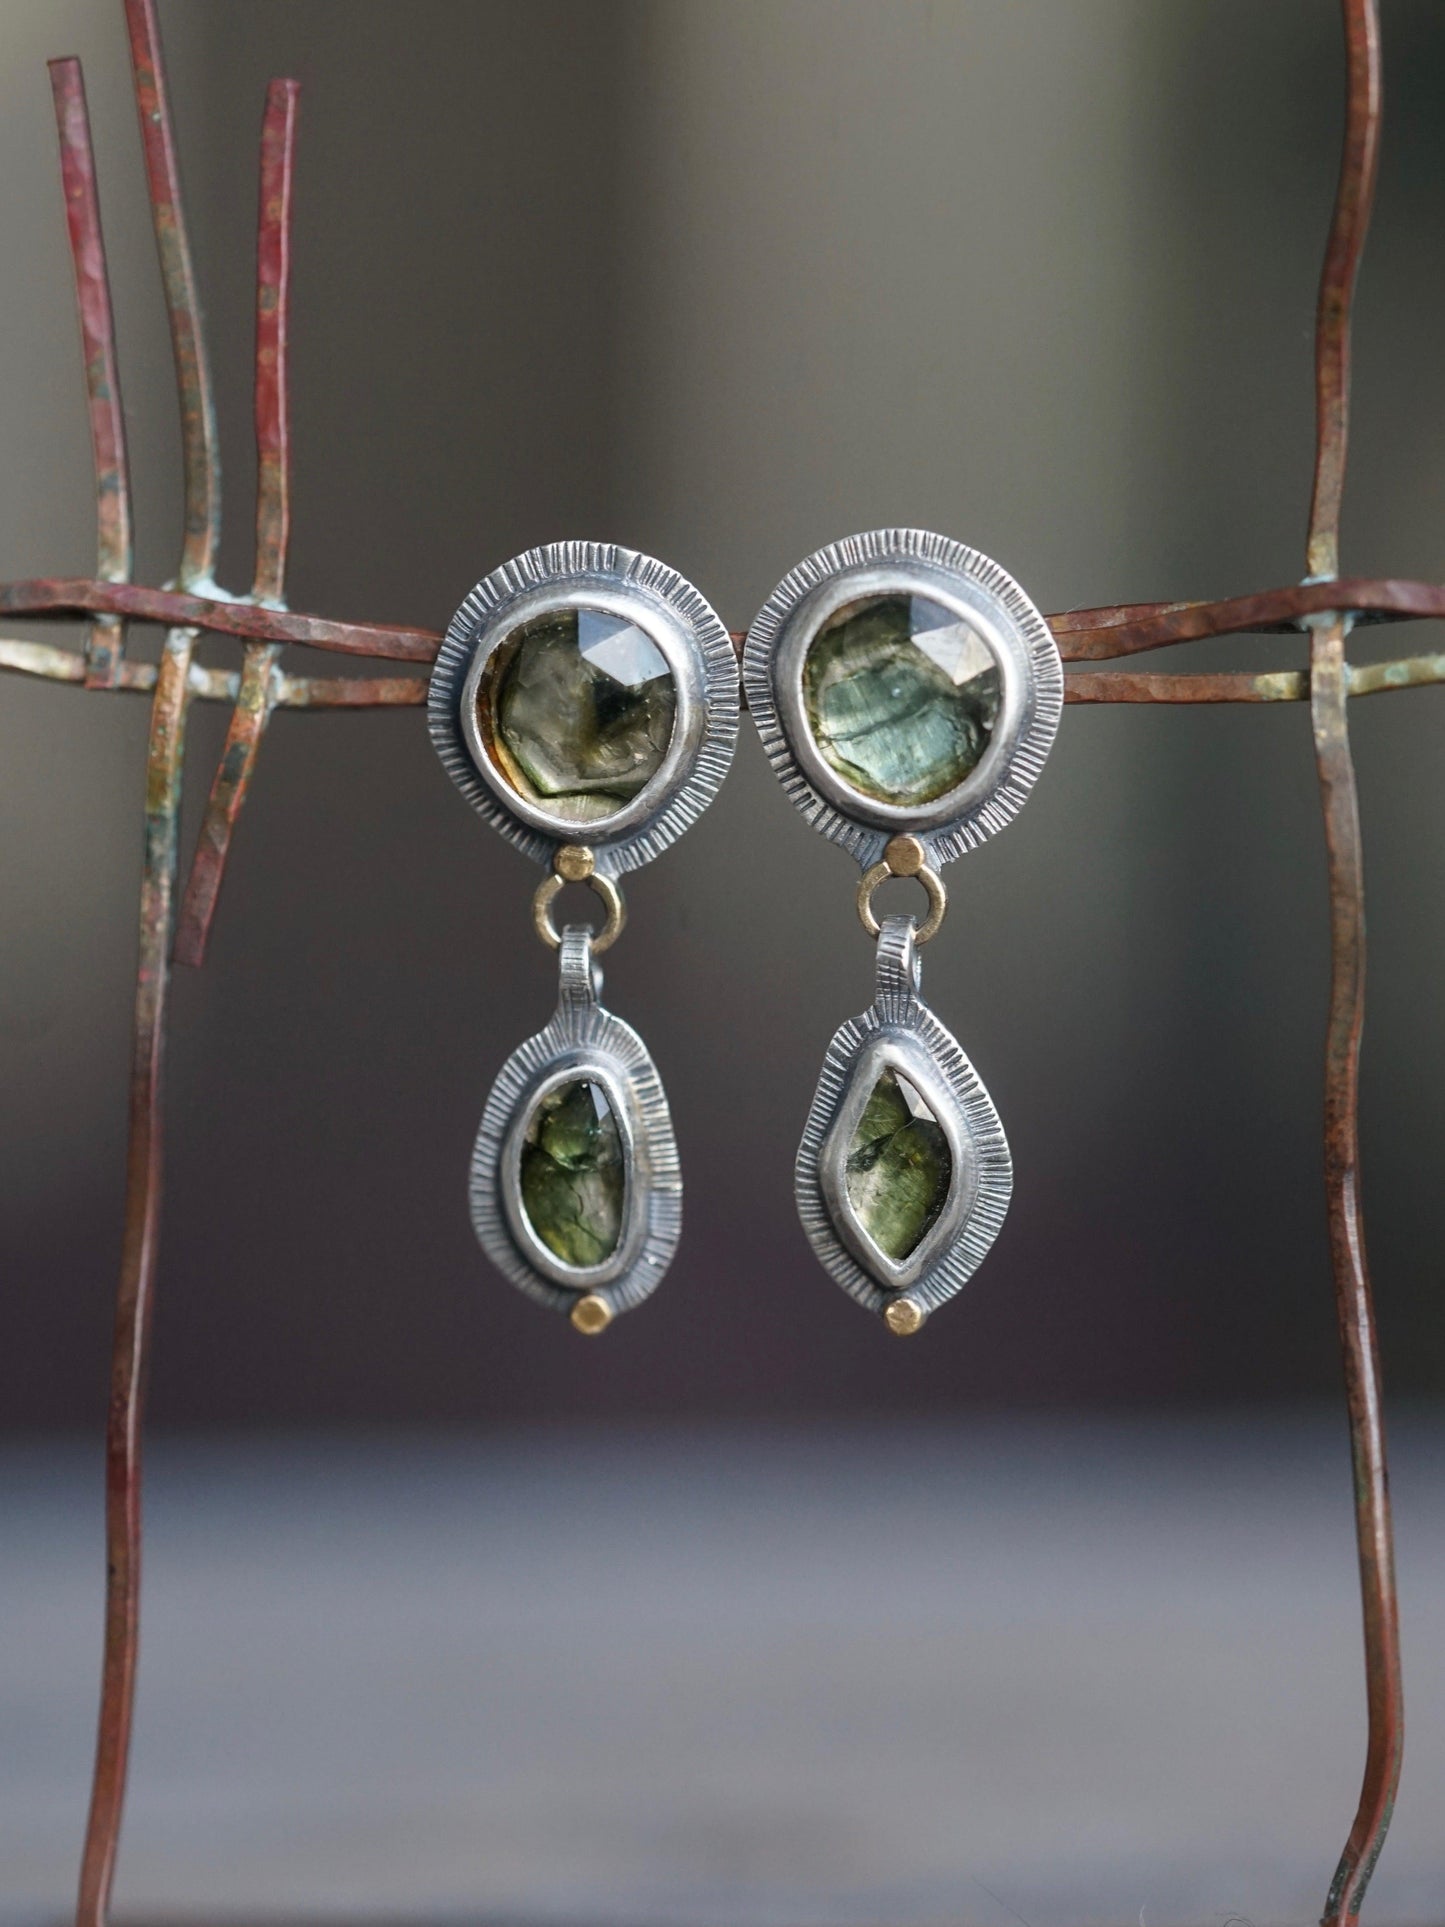 Green tourmaline earrings with 22k gold accents